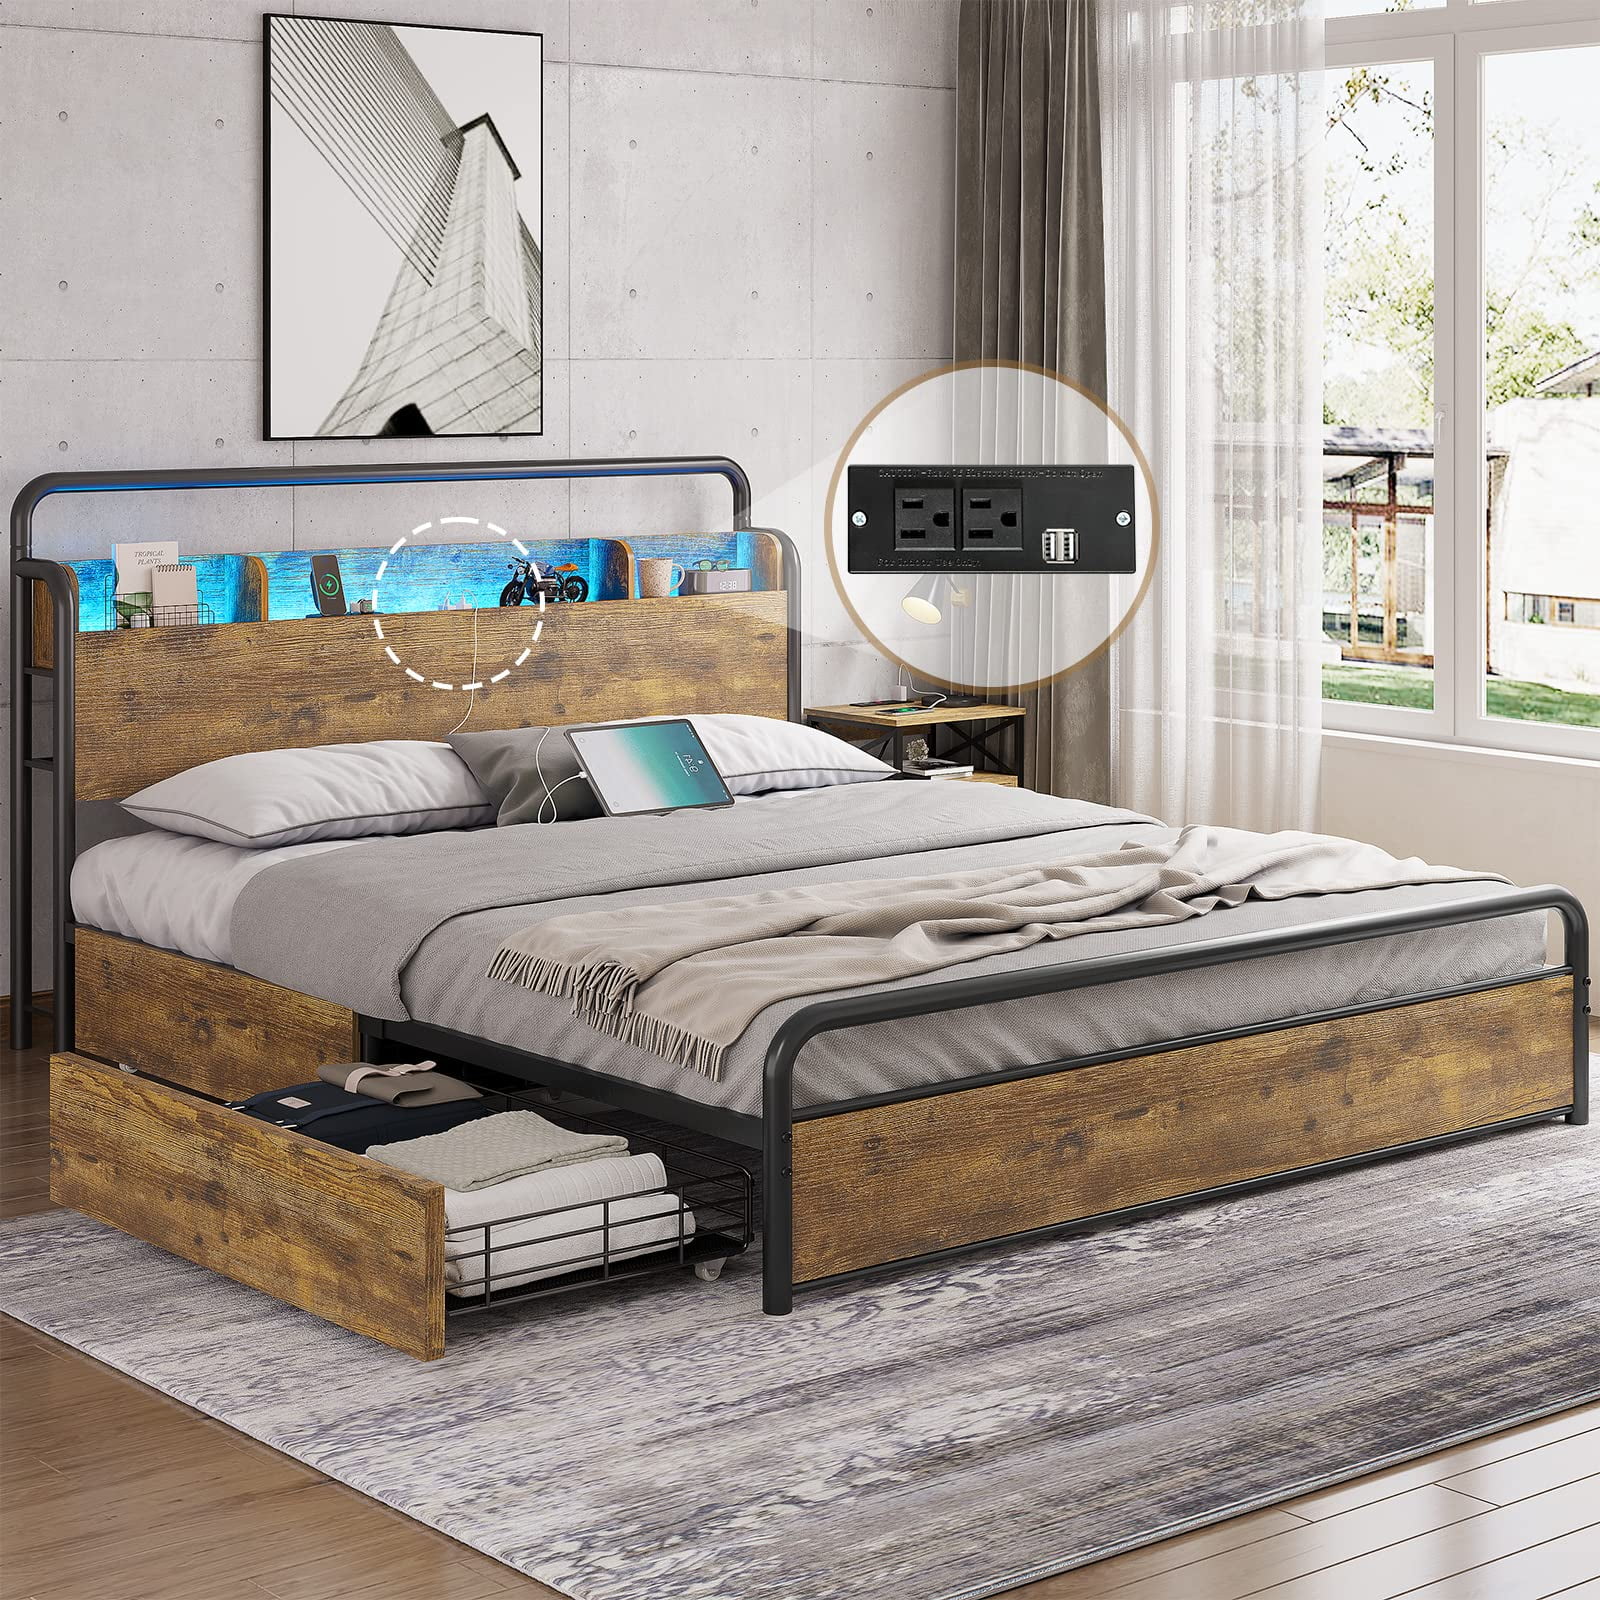  Tiptiper Bed Frame Full Size with Storage Drawers & LED Lights  Headboard, Platform Bed Frame with Outlets & USB Ports, Noise-Free, No Box  Spring Needed, Rustic Brown : Home & Kitchen